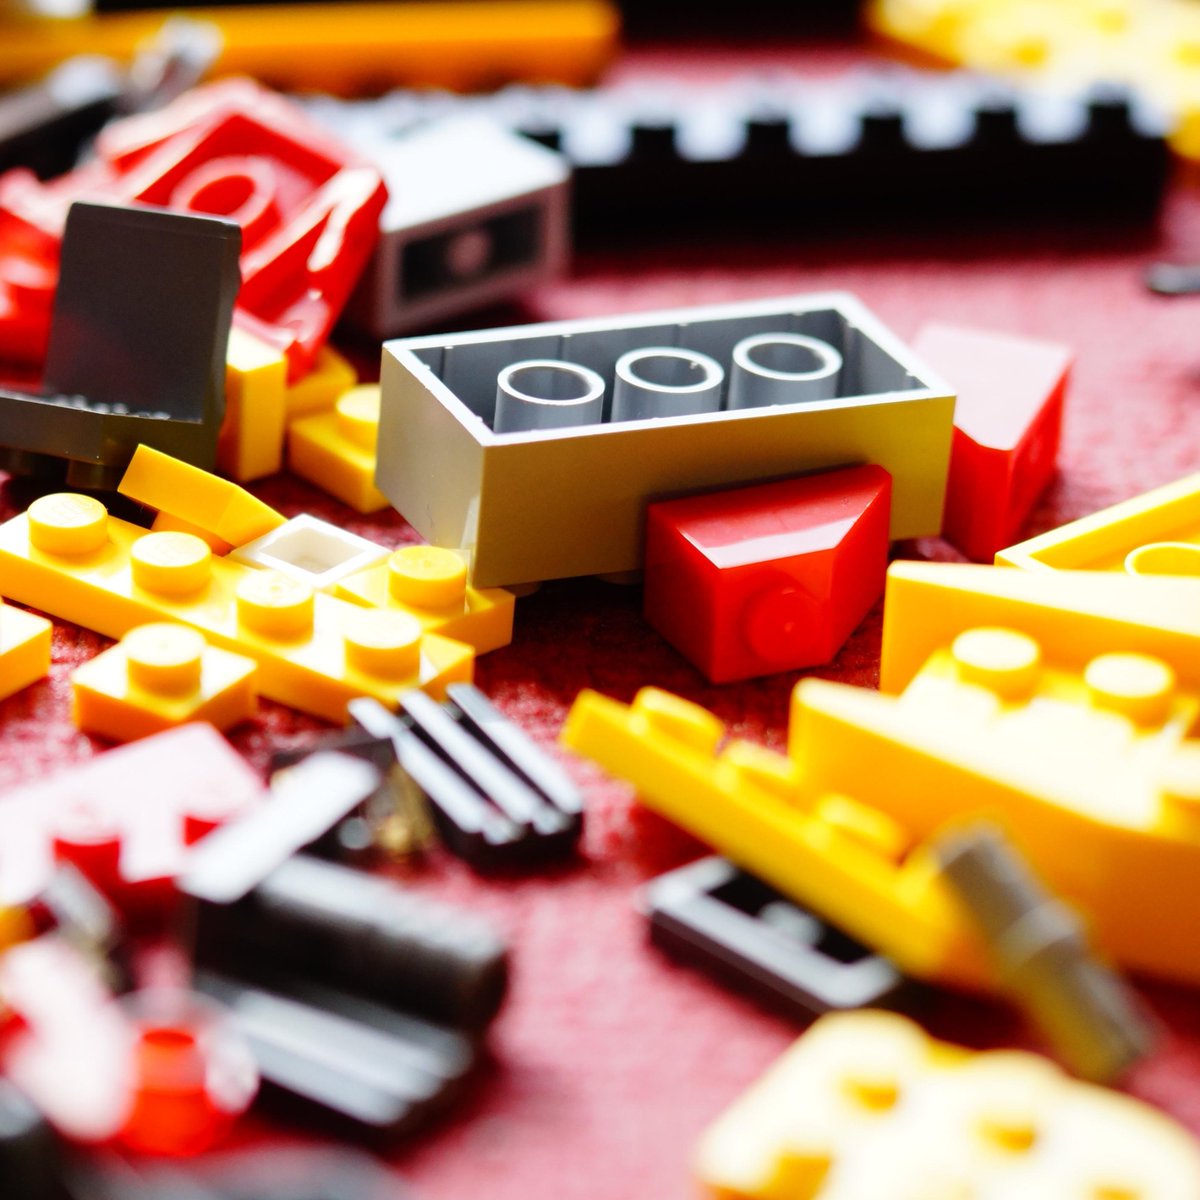 Crafty engineering projects 🧱Lego club, Mon 10 and 17 Oct ♻️Junk engineering, Thu 13 and 20 Oct 🧩The big puzzle, Sat 15 Oct 💻Code and fly a drone, Sat 22 Oct if-oxford.com @Oxonlibraries @TheDroneRules